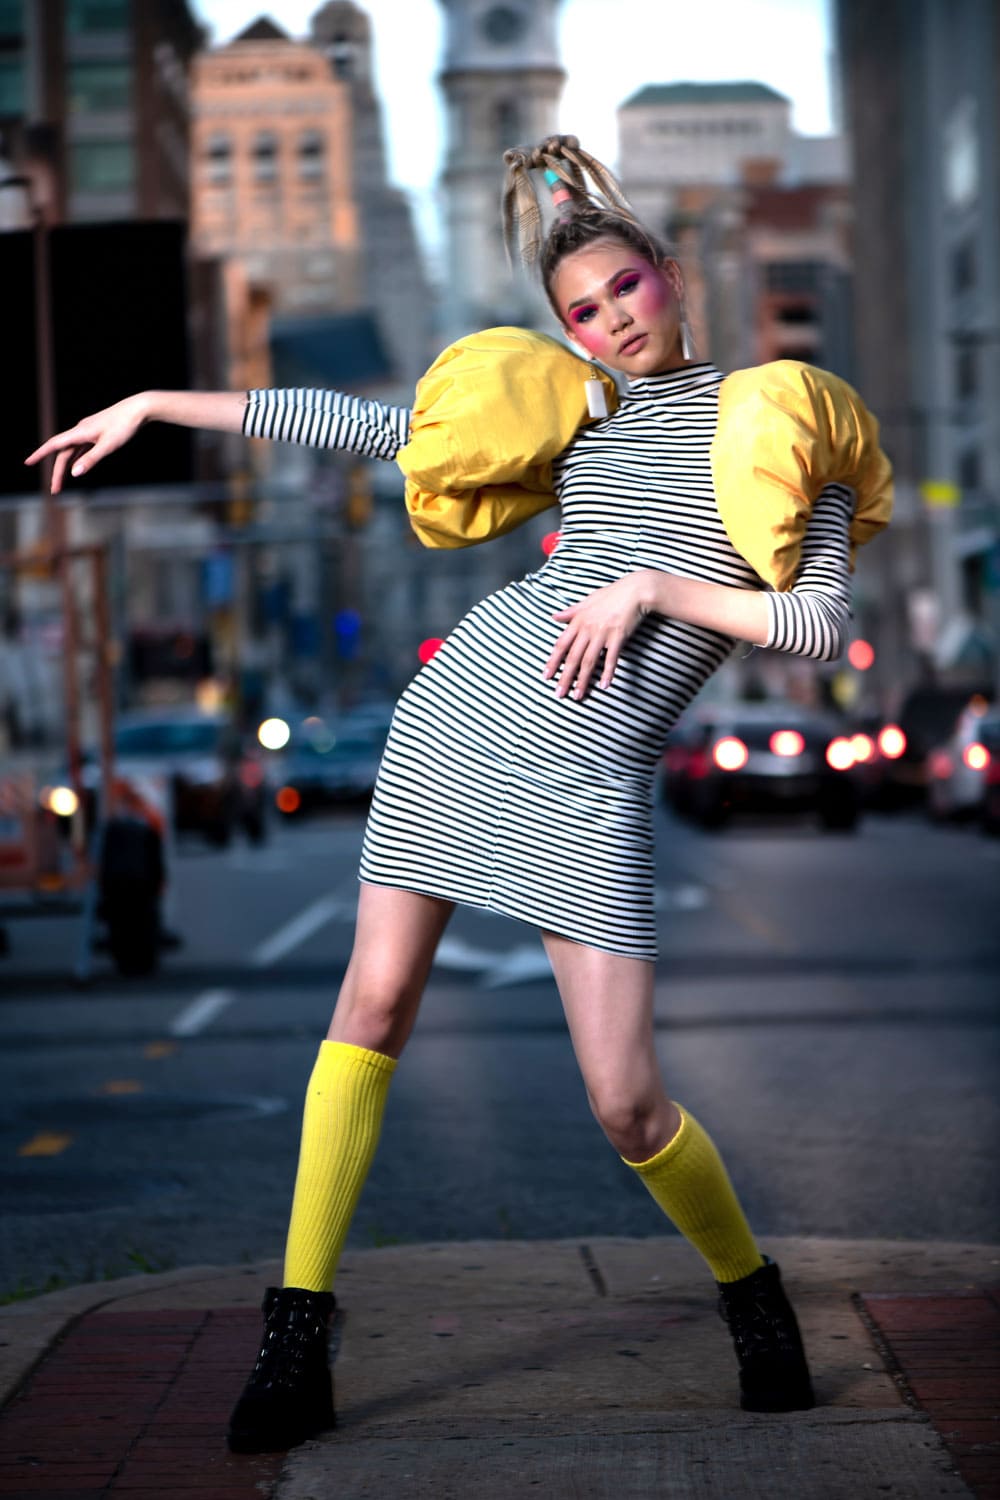 City Girl Style Editorial